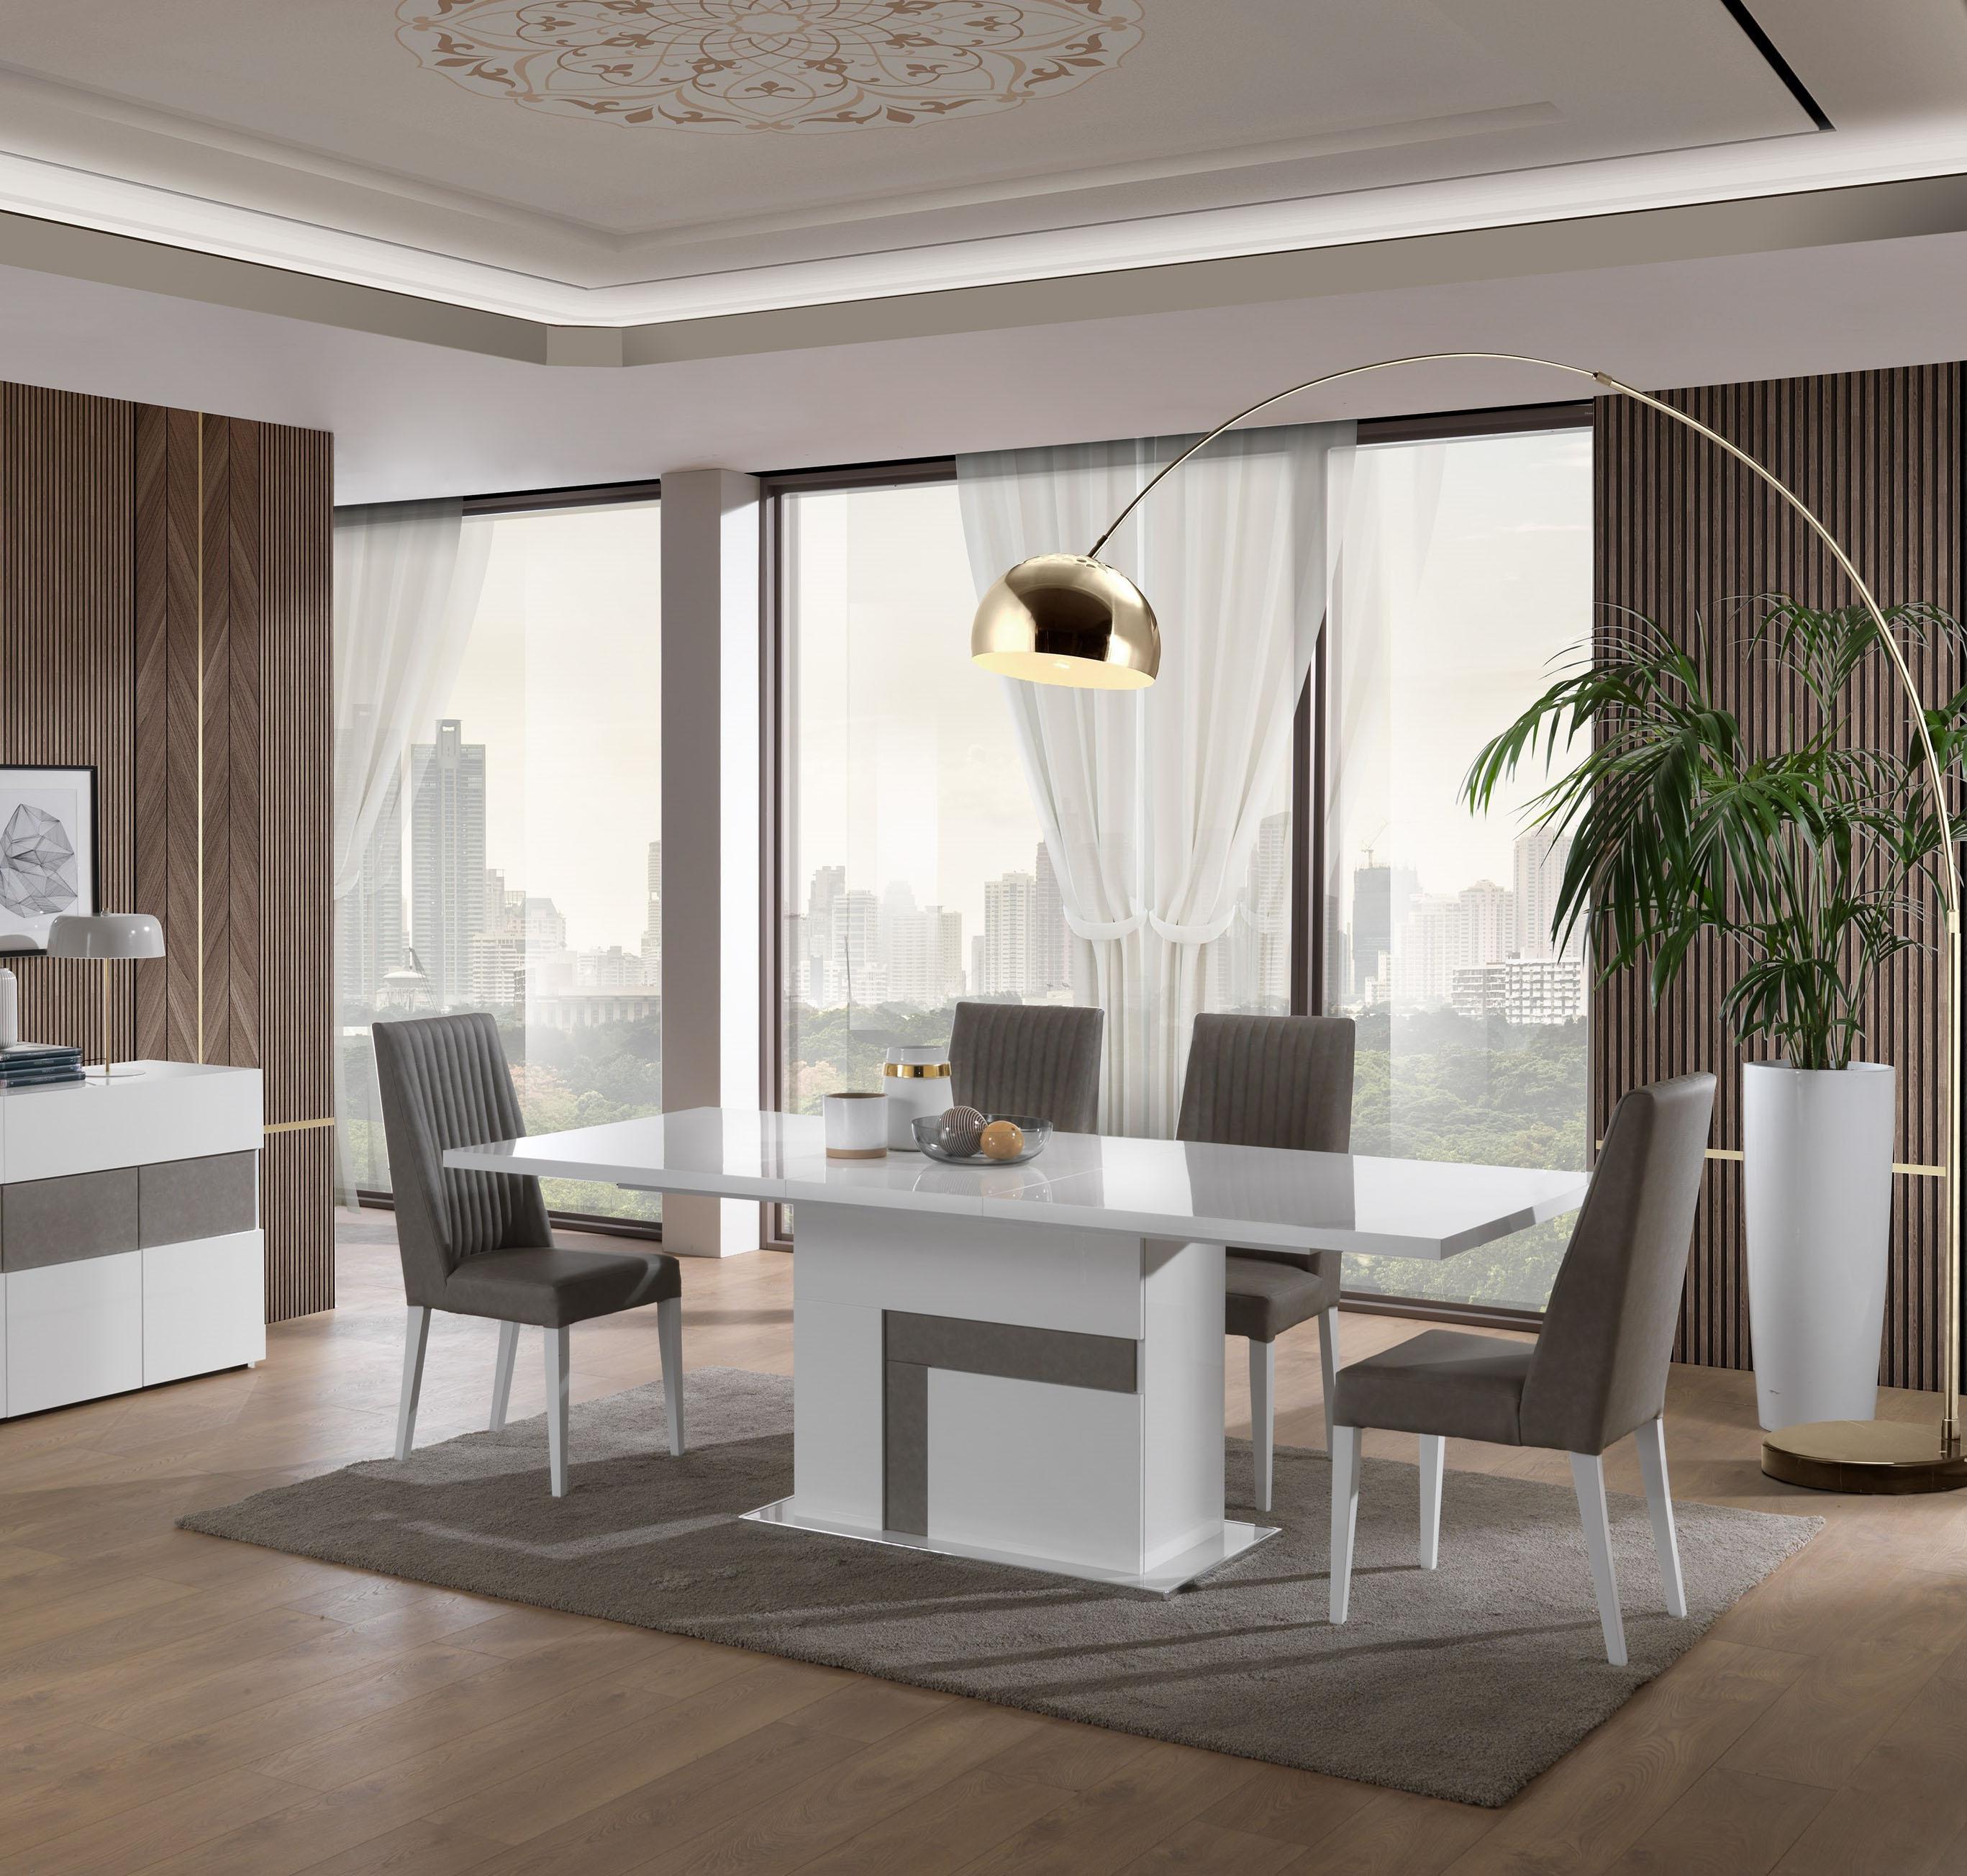 Contemporary, Modern Dining Set Luxuria SKU18122-5PC in White, Gray Eco Leather